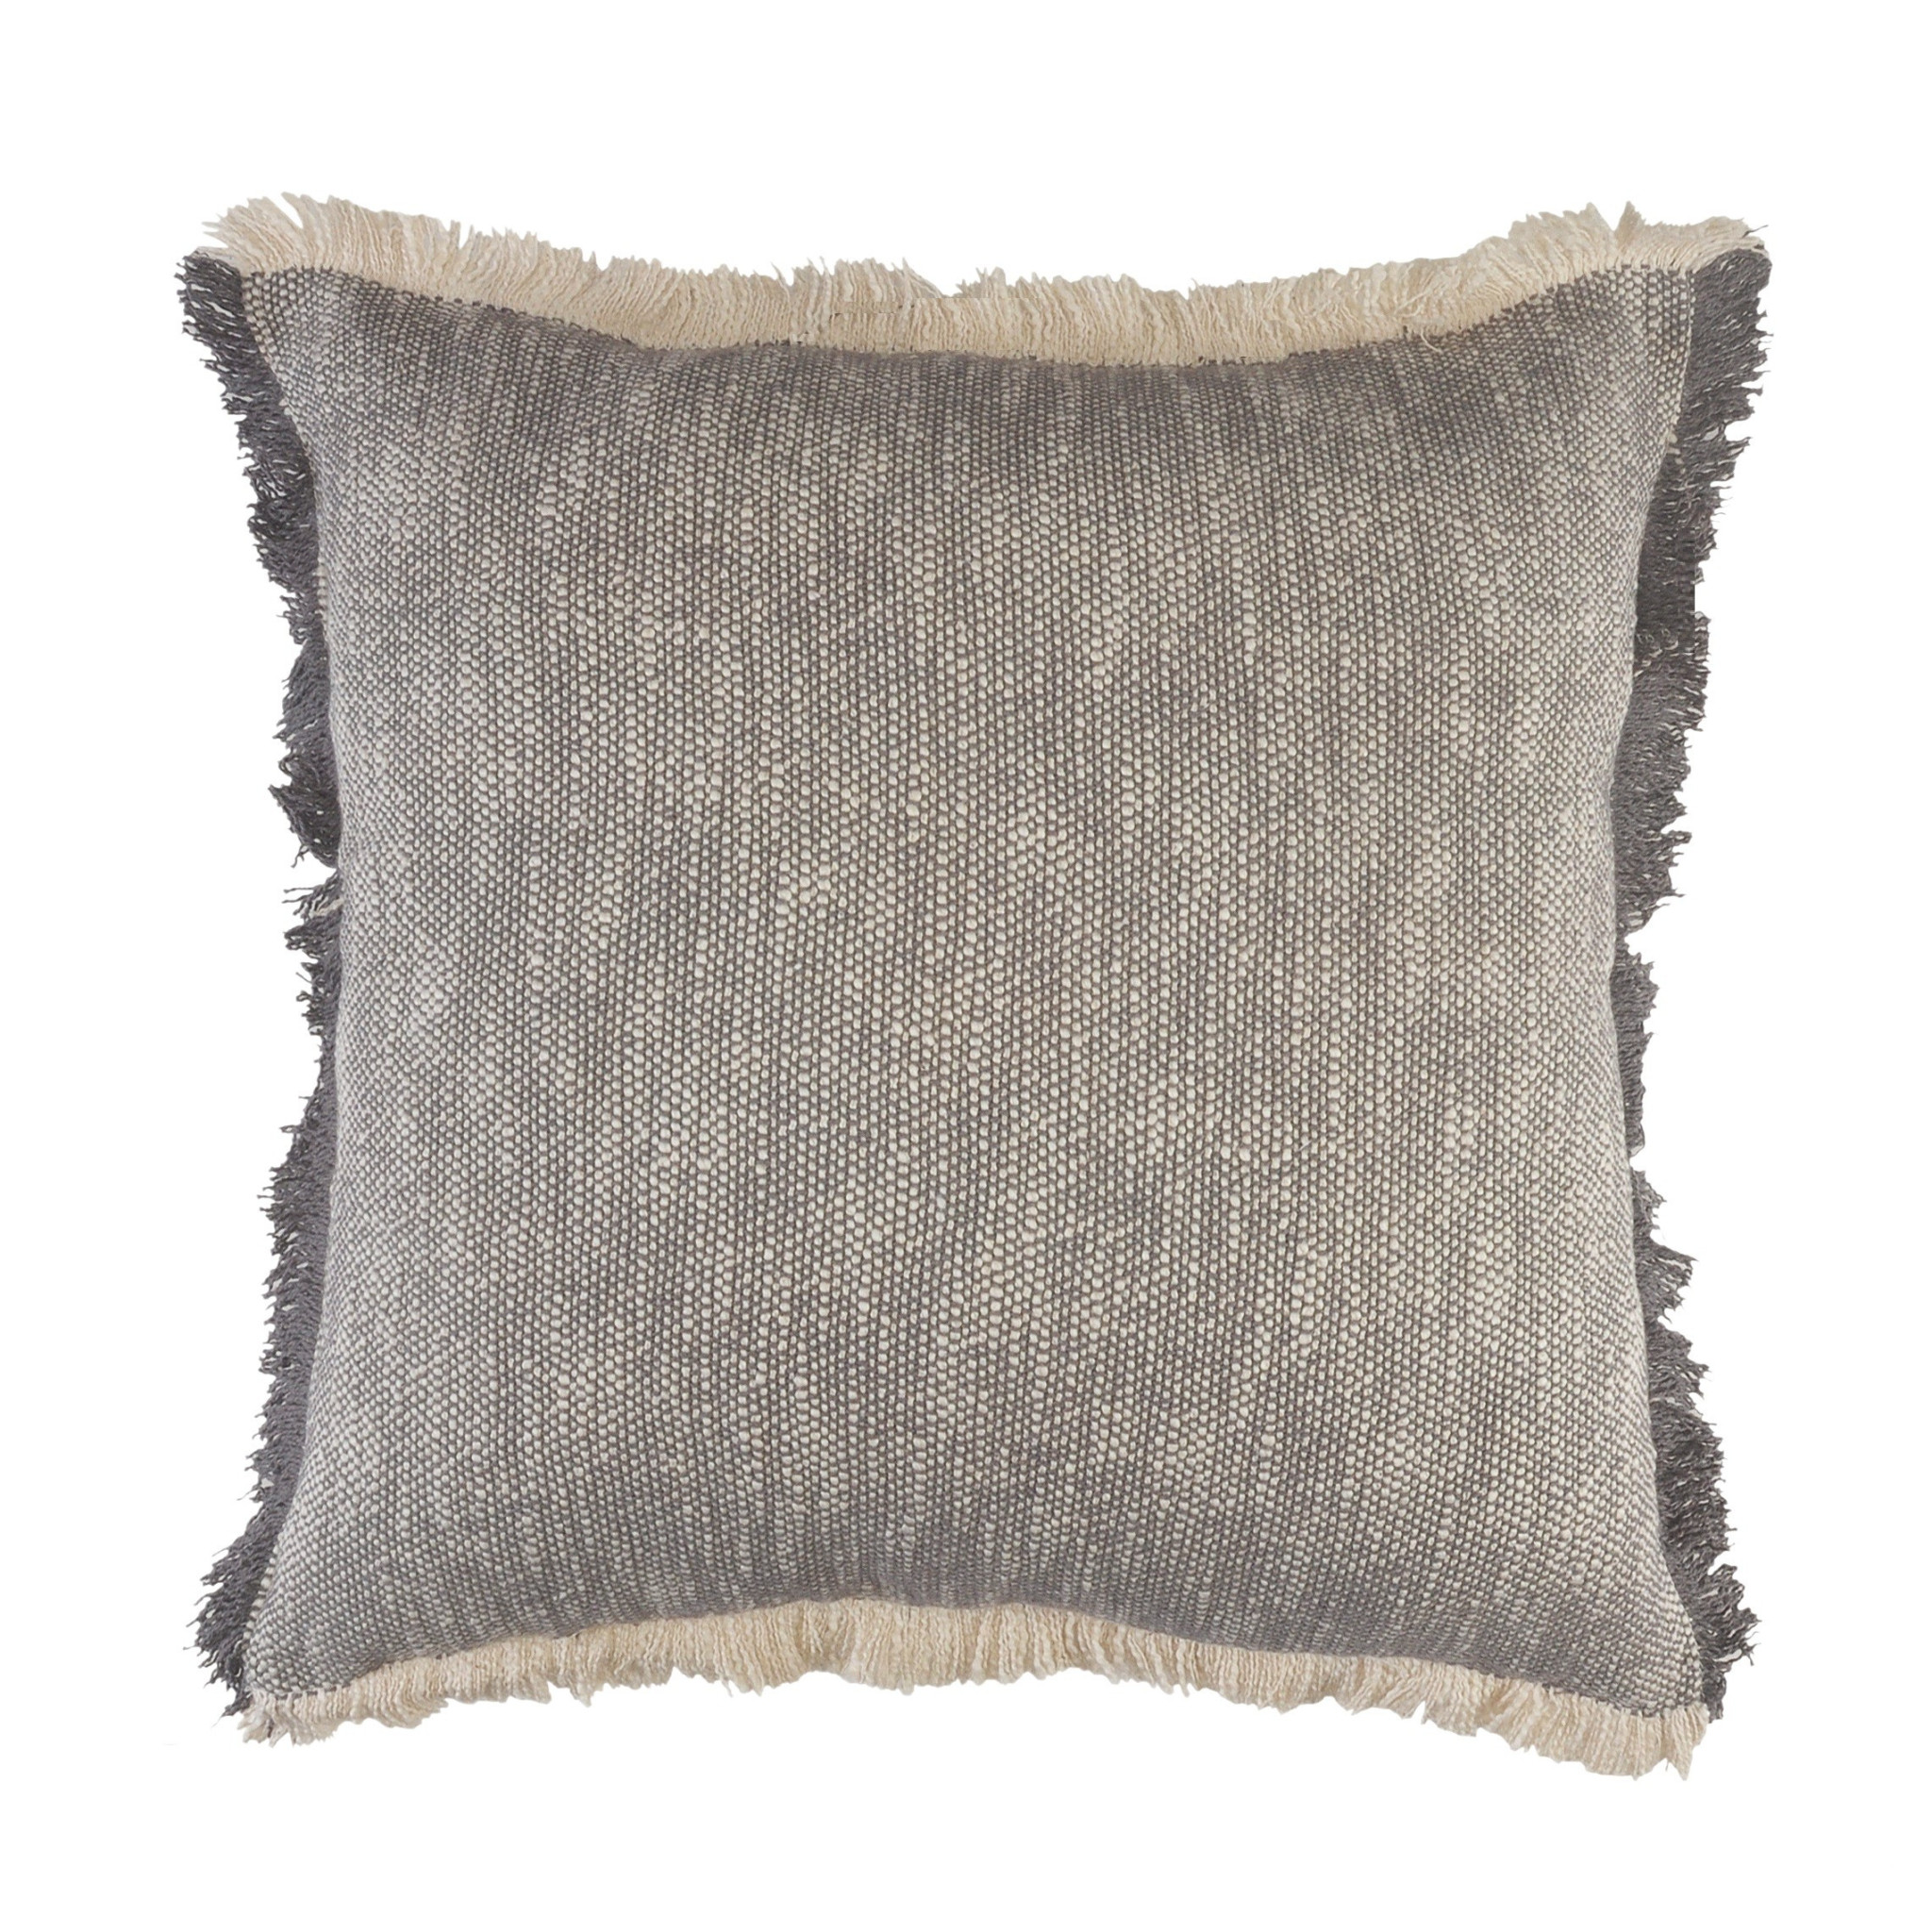 20" X 20" Gray And White 100% Cotton Abstract Zippered Pillow-516677-1